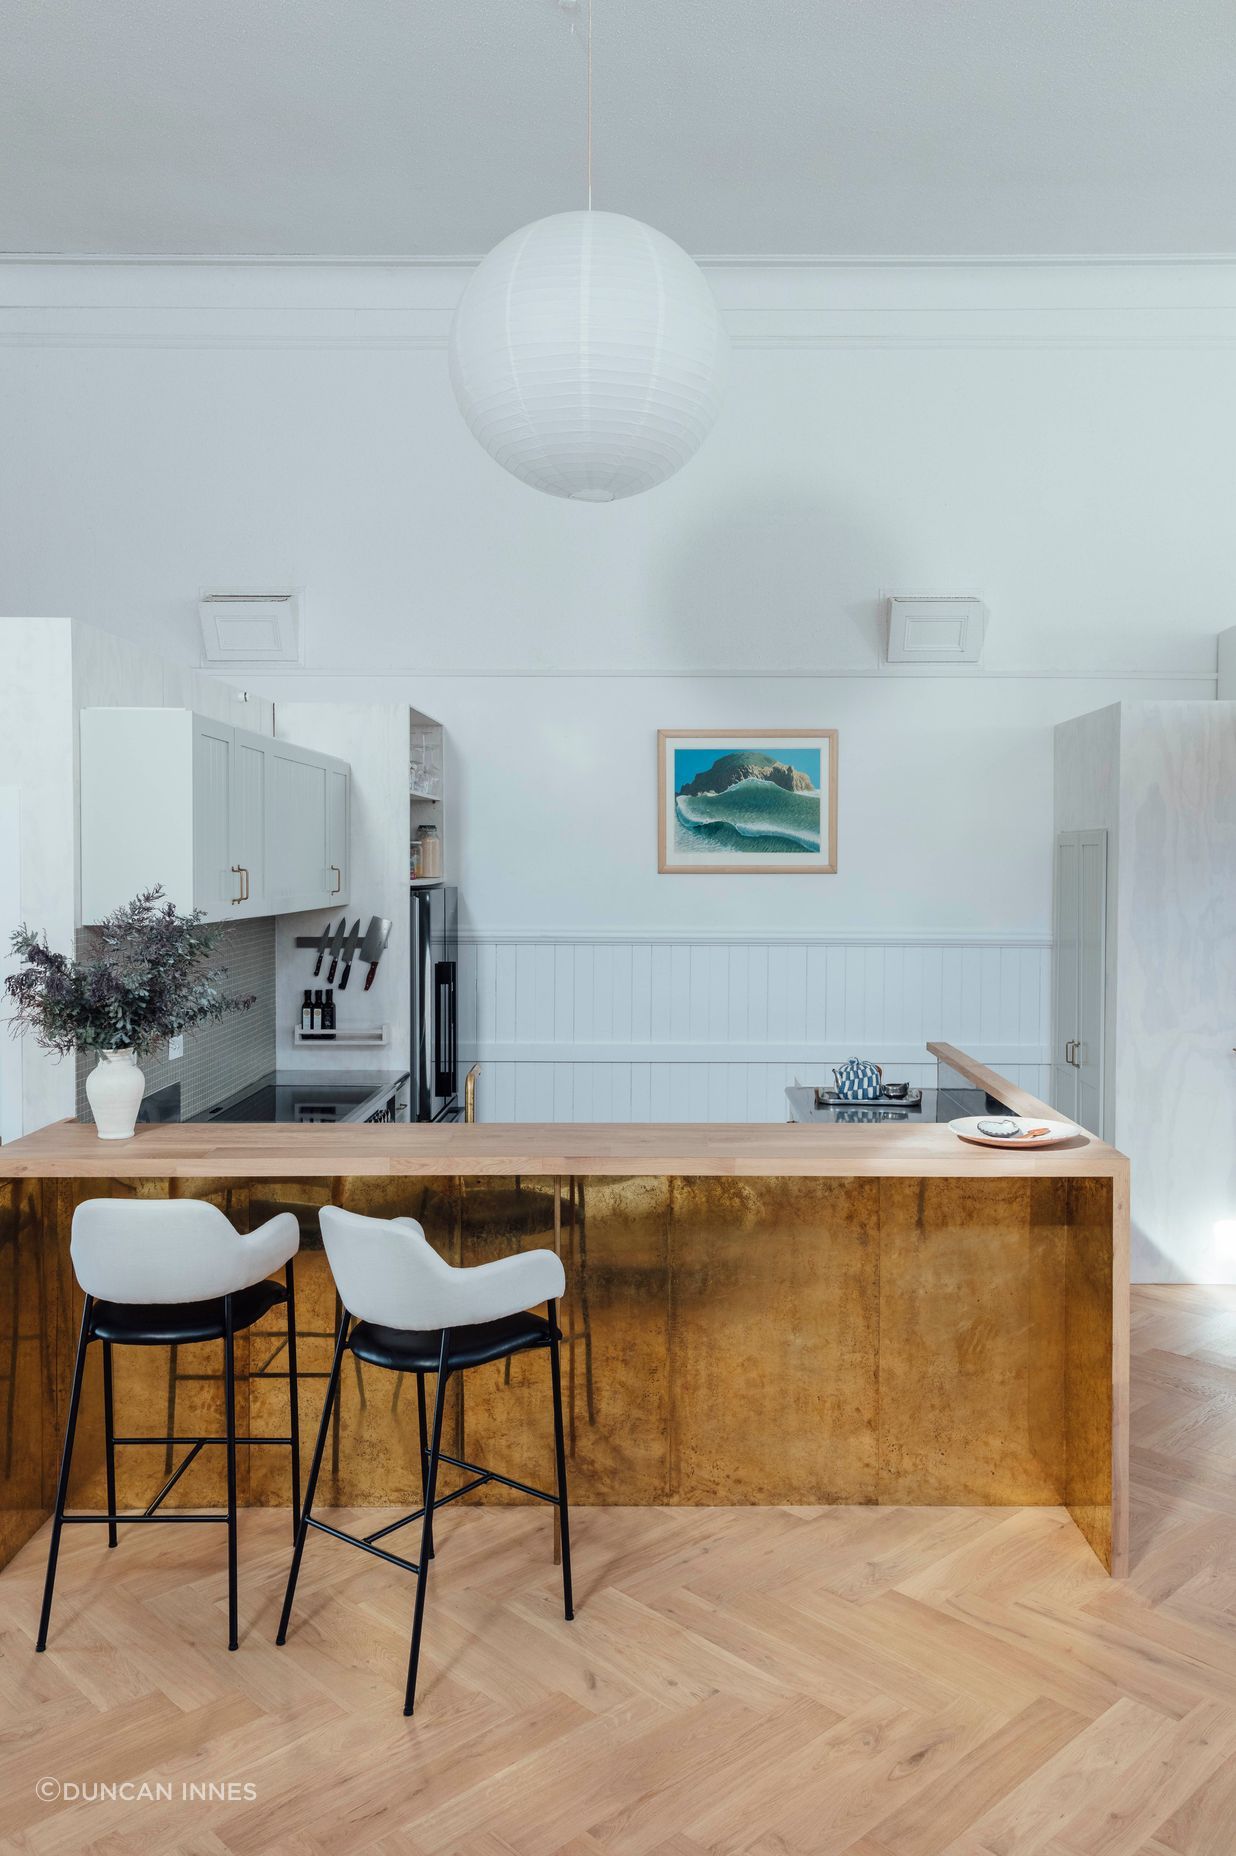 The kitchen features a timber breakfast bar and brass details. 